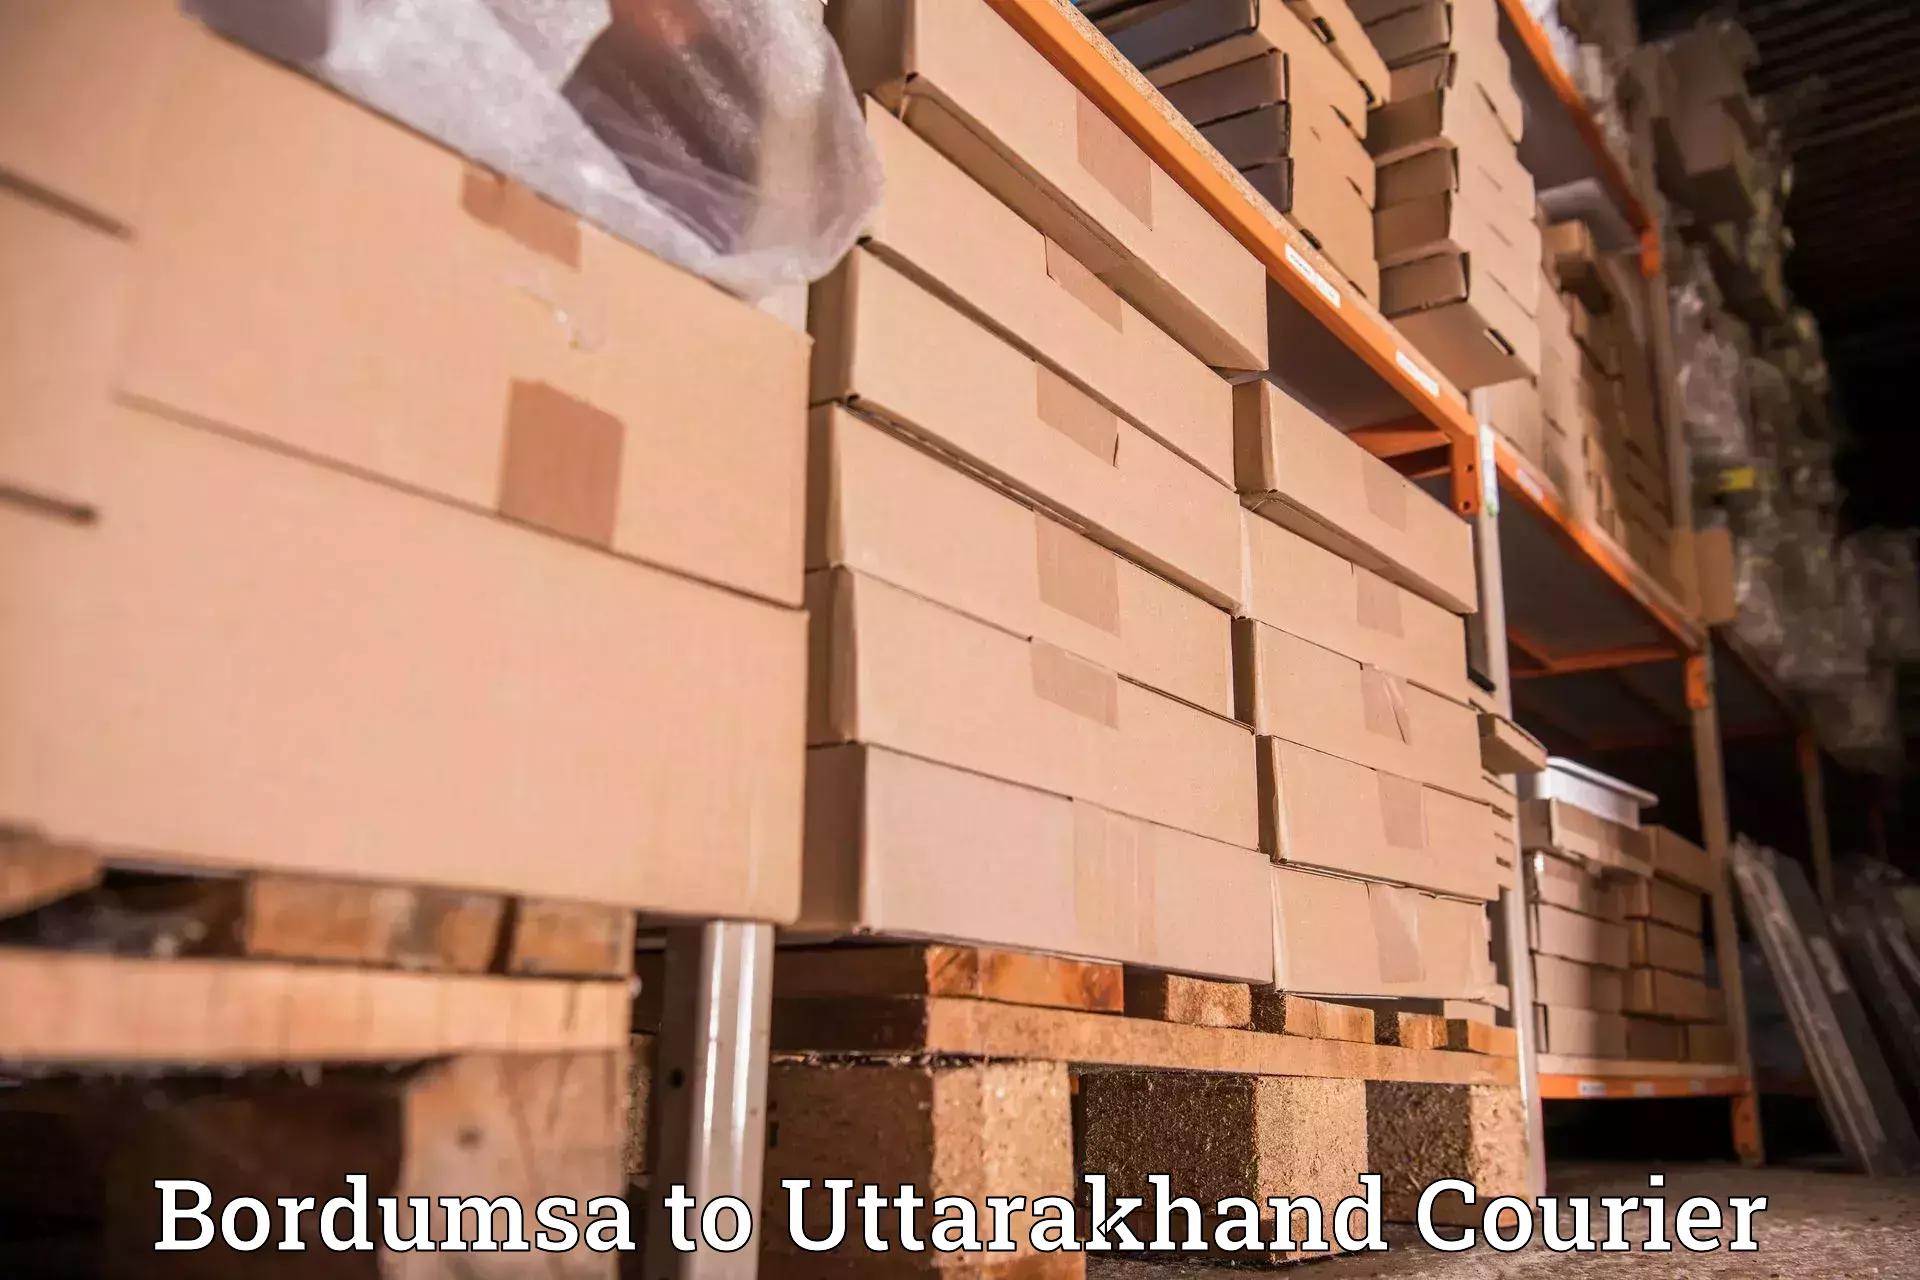 Multi-national courier services Bordumsa to Bageshwar